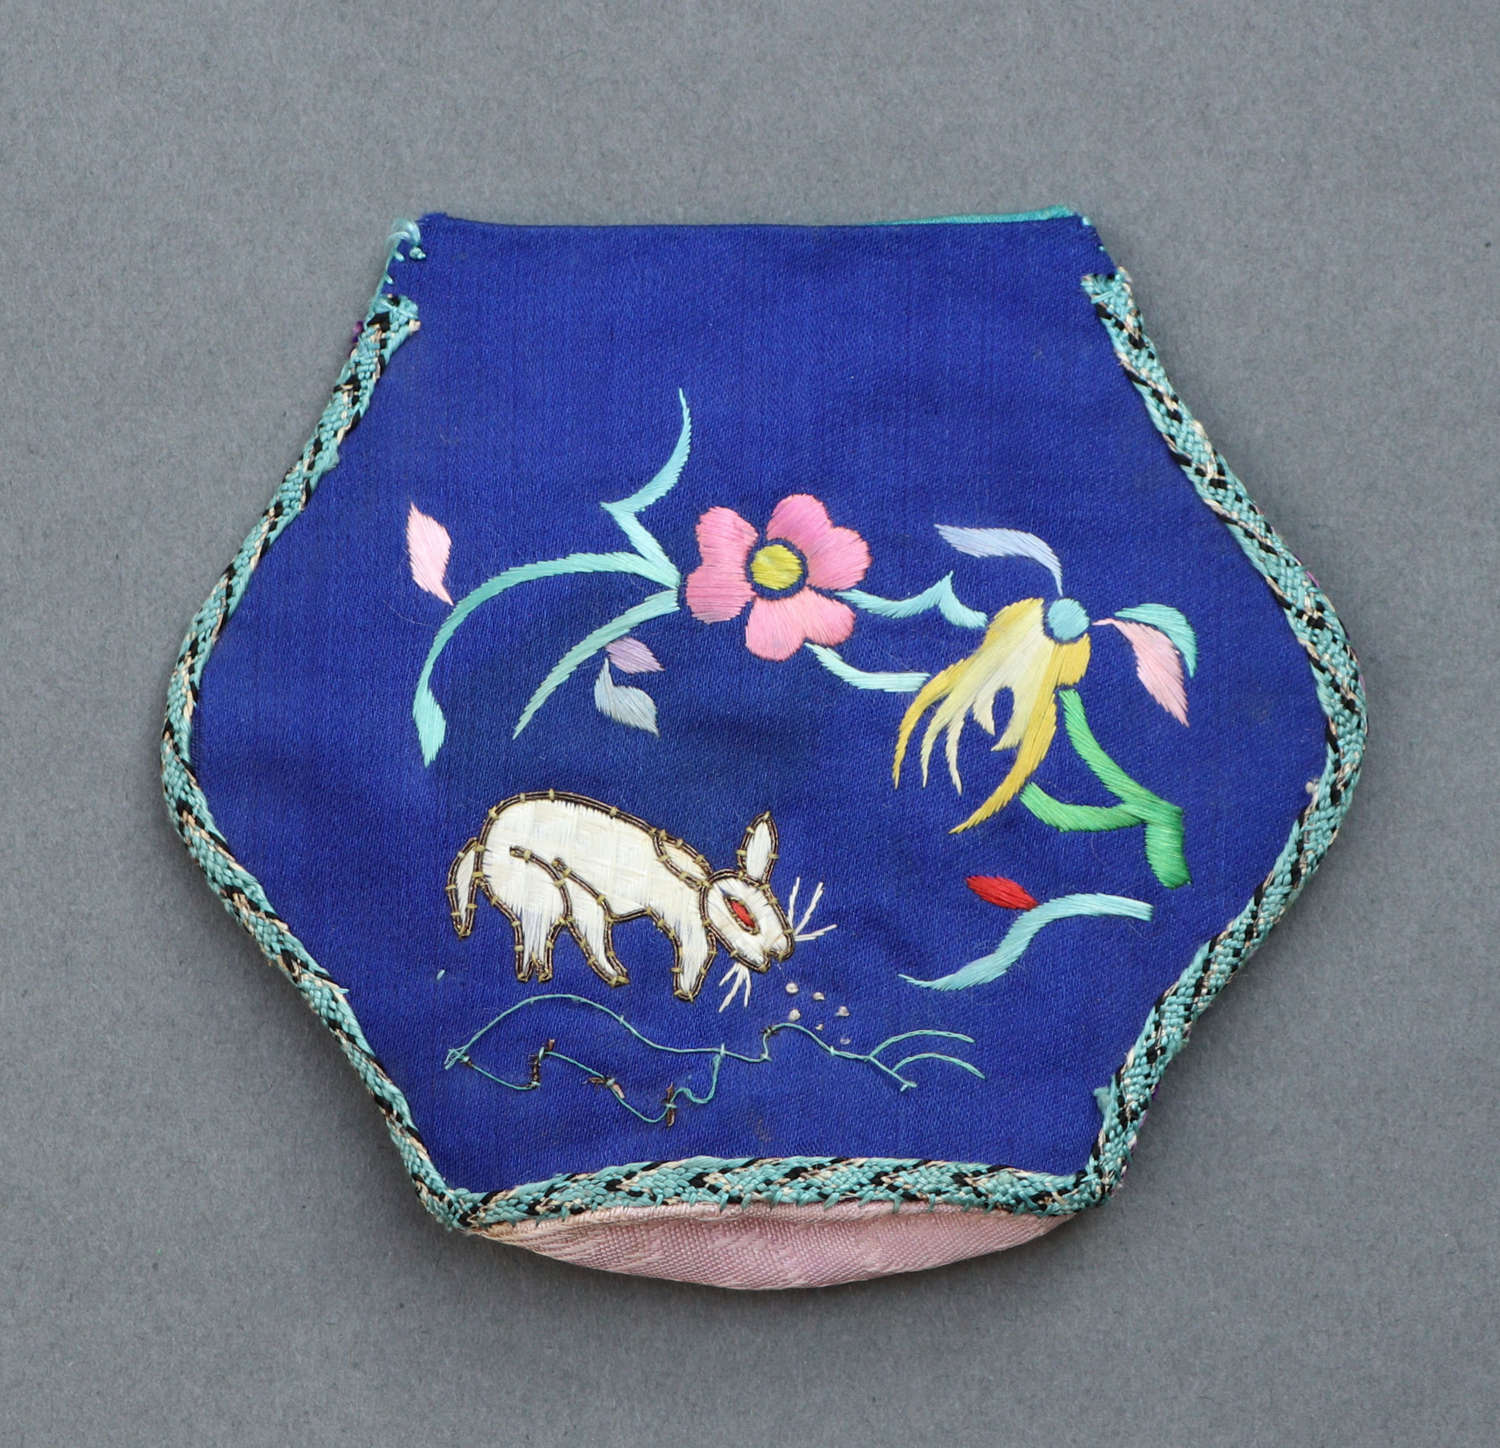 A small Chinese folk embroidery hexagonal purse c1920